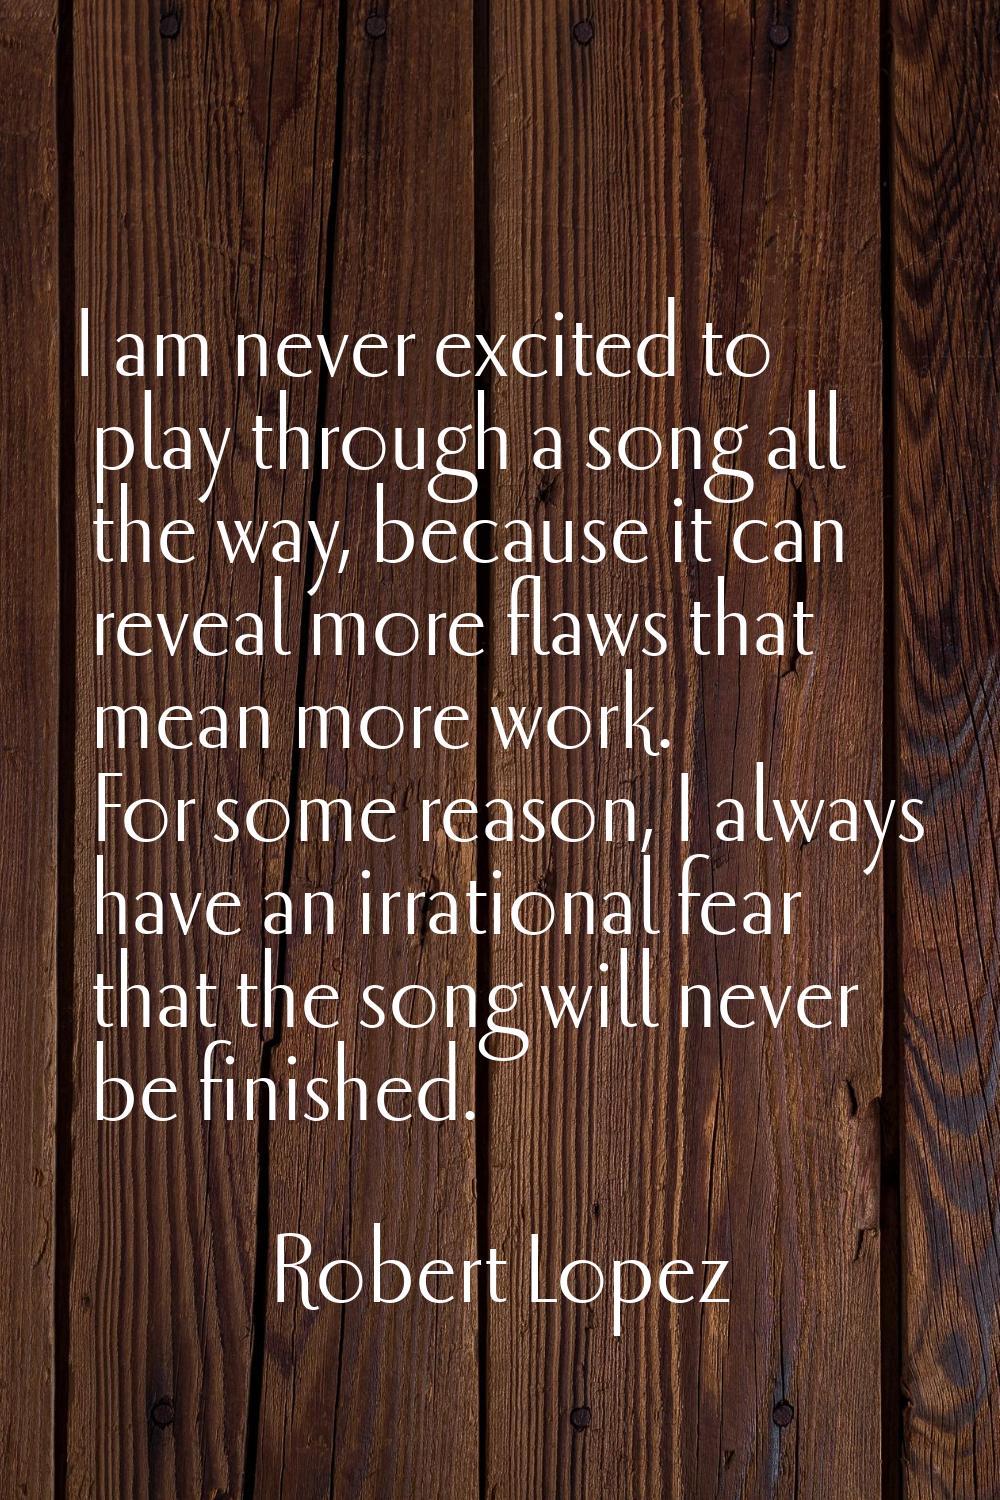 I am never excited to play through a song all the way, because it can reveal more flaws that mean m